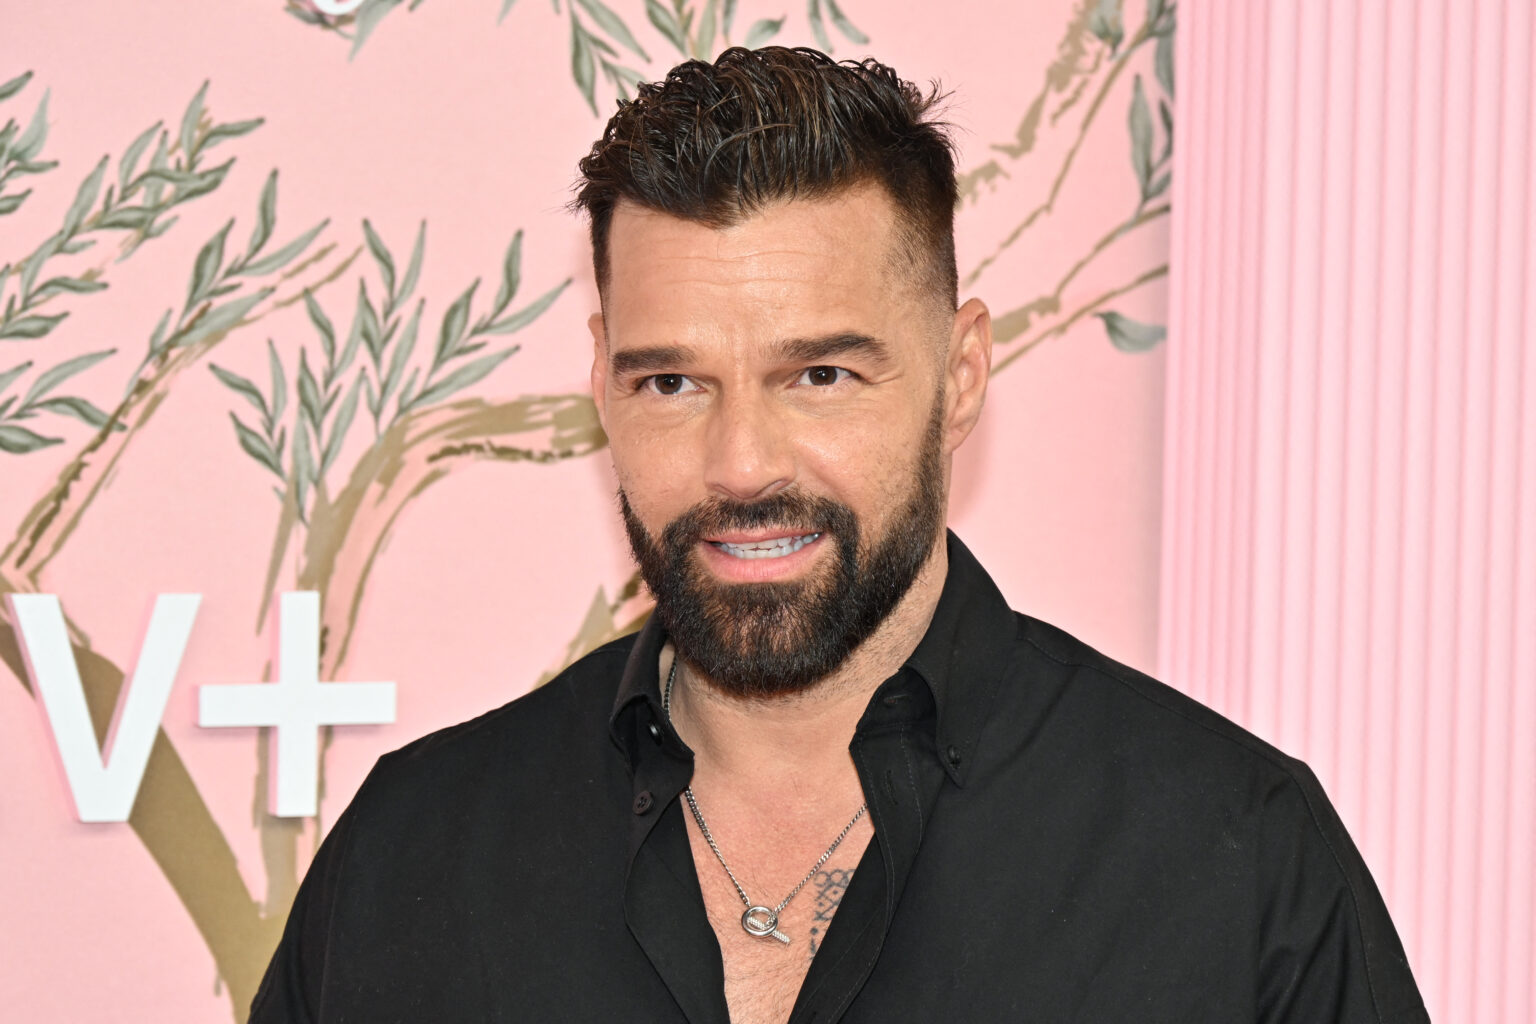 Ricky Martin boldly discusses his foot fetish.